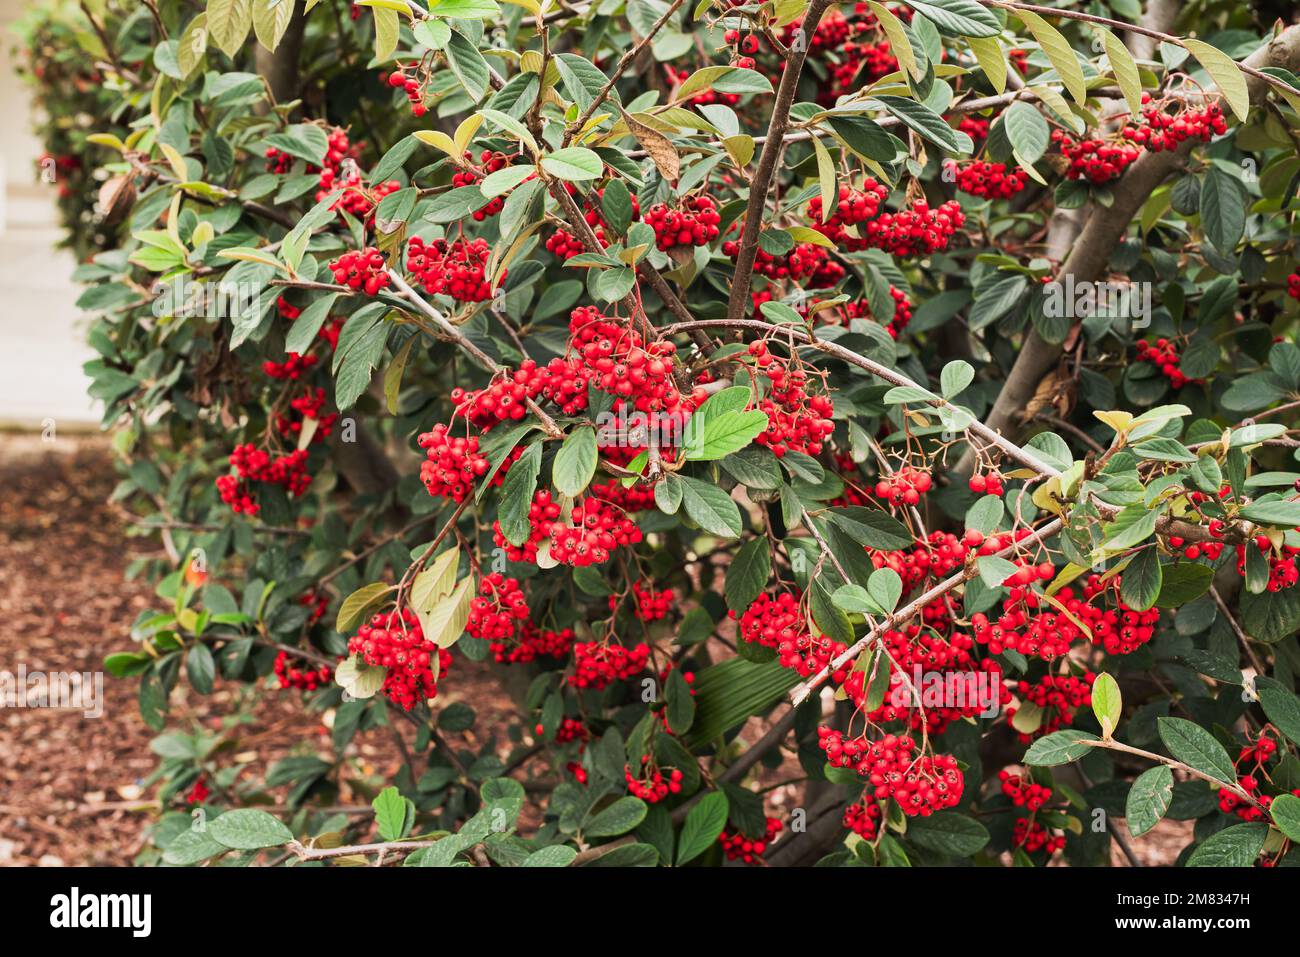 Cotoneaster coriaceus ornamental plant with vibrant red berries and dark green foliage close-up in city park Stock Photo